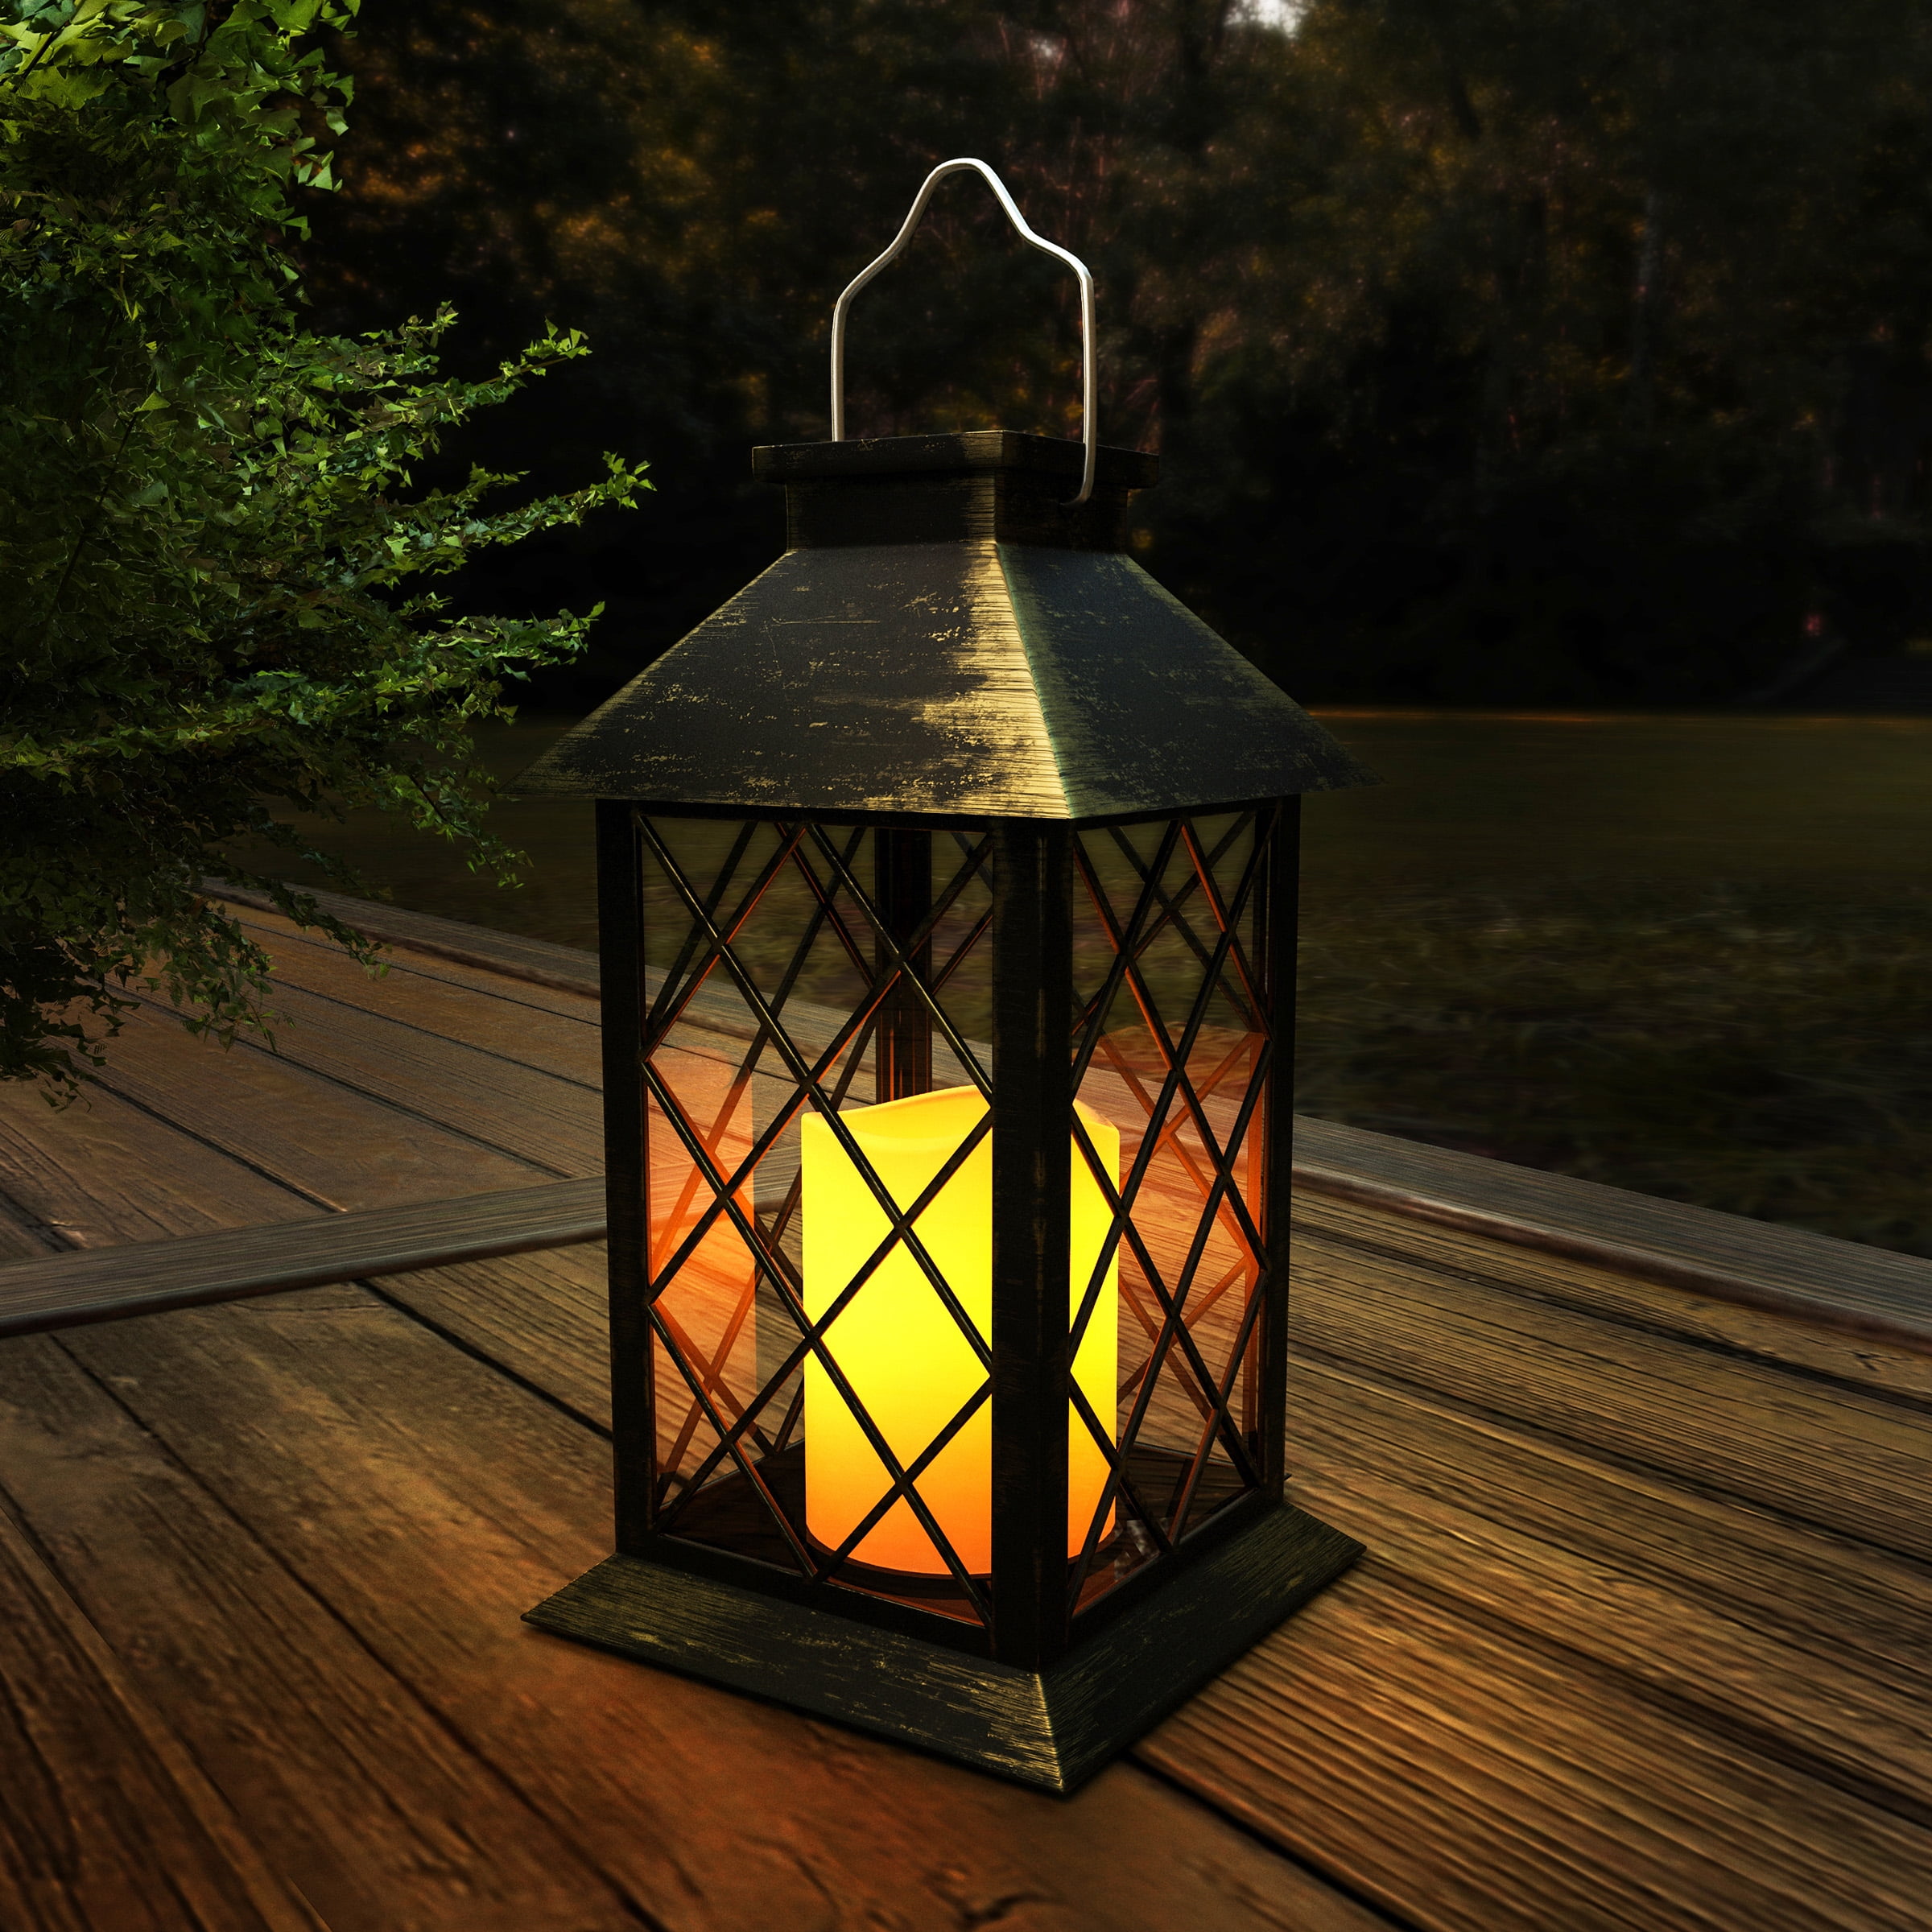 Solar LED Lantern with Candle Lamp Garden Light Wicker Basket Look 